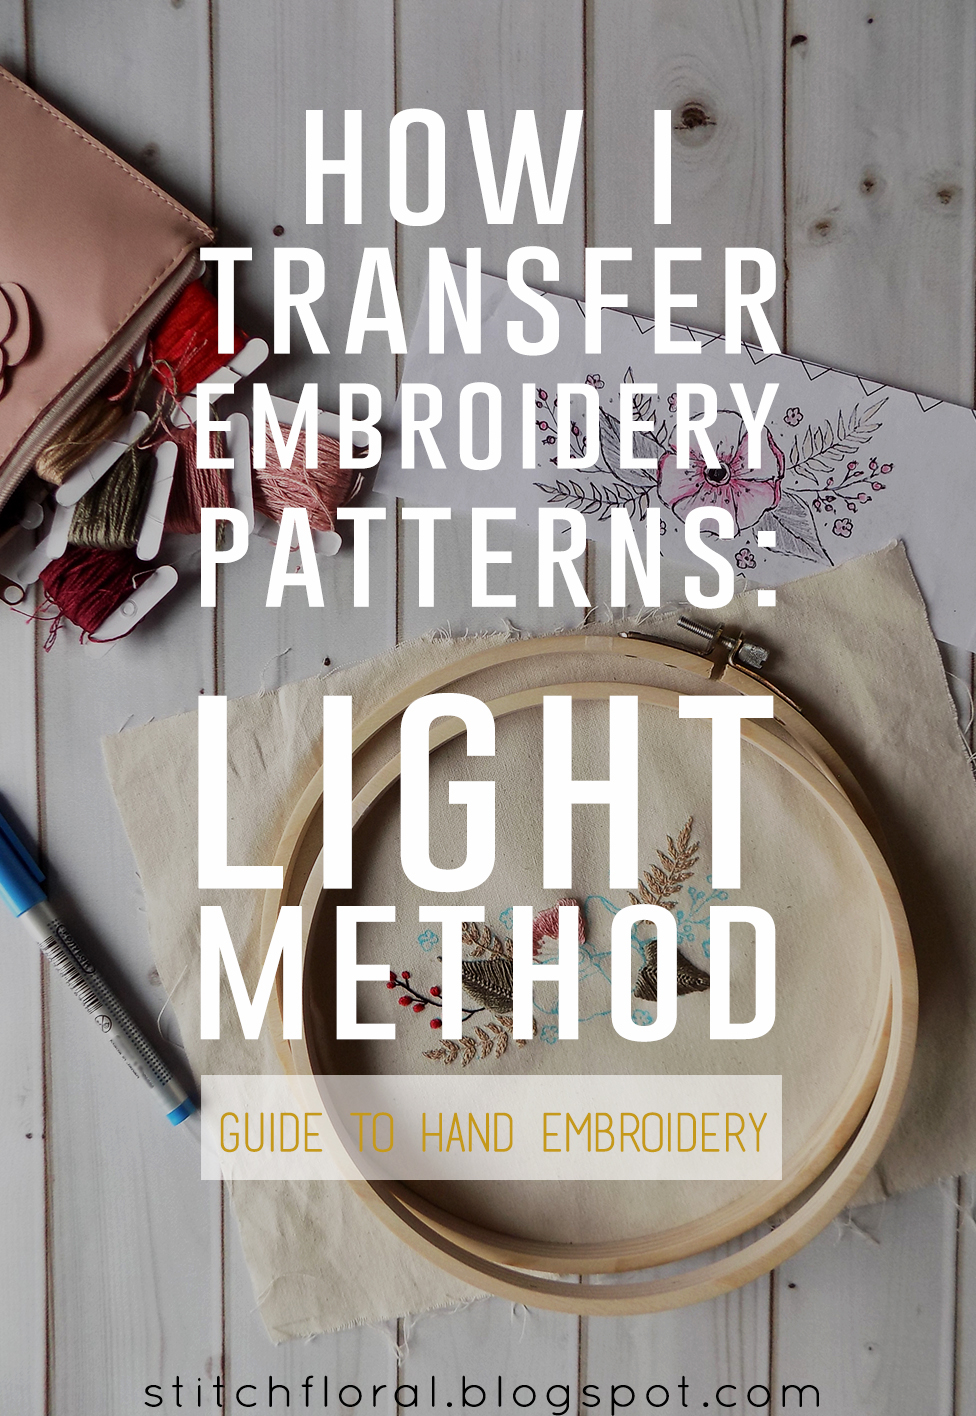 How To Transfer Embroidery Pattern How I Transfer Embroidery Patterns Light Method Stitch Floral